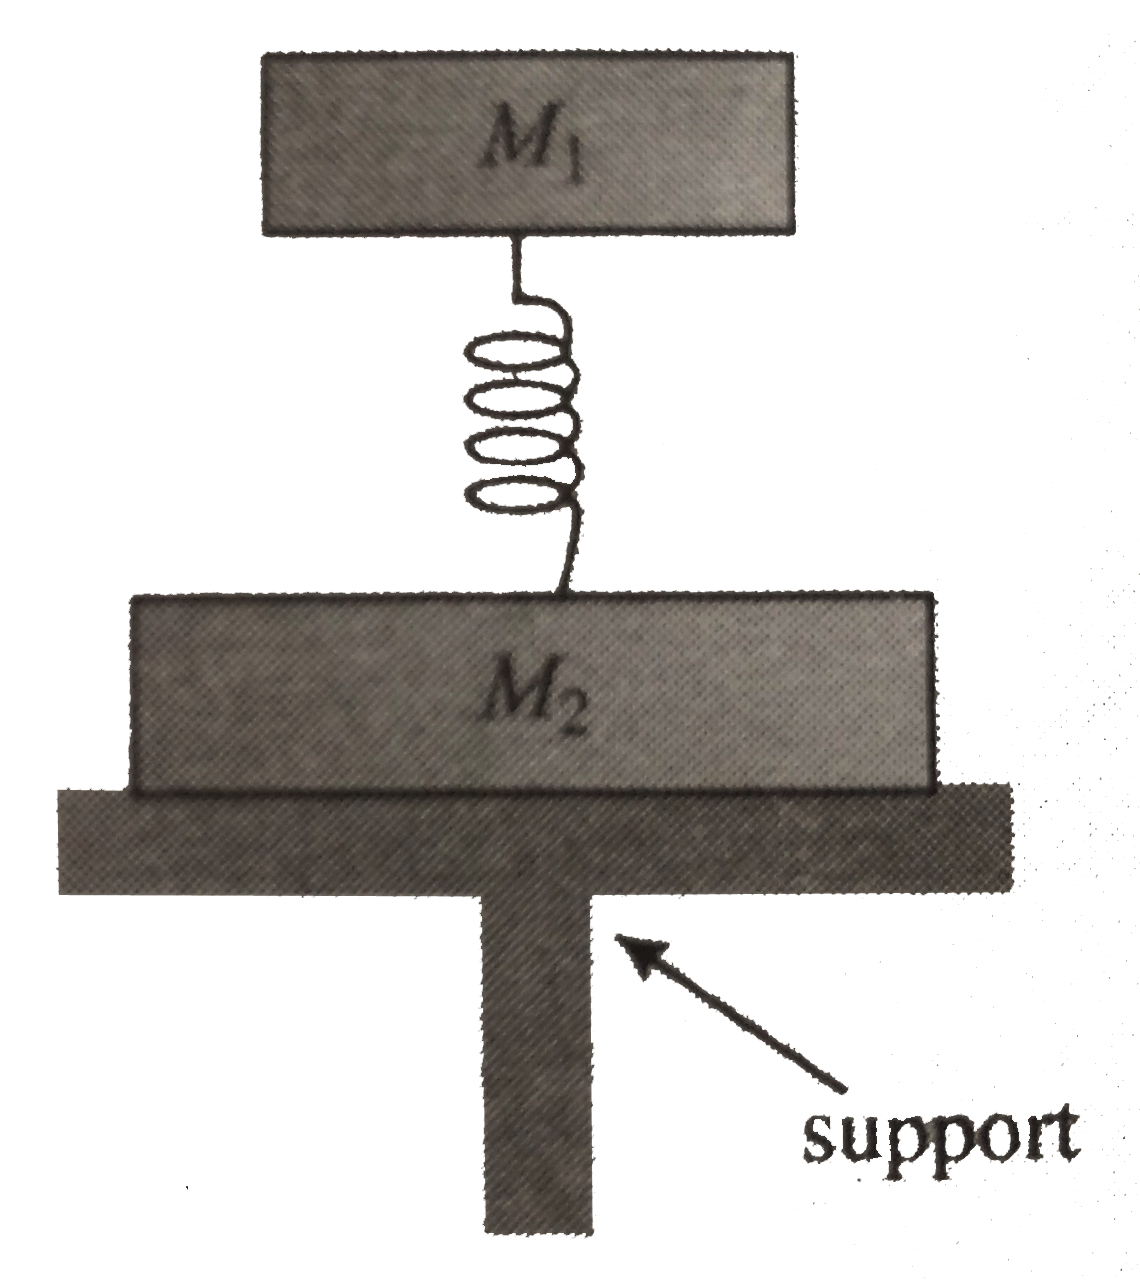 The system of two weights with masses M(1) and M(2) are connected with weightless spring as shown in fig. The system is resting on the support S. Find the acceleration of each of the weights just after the support S is quickly removed.